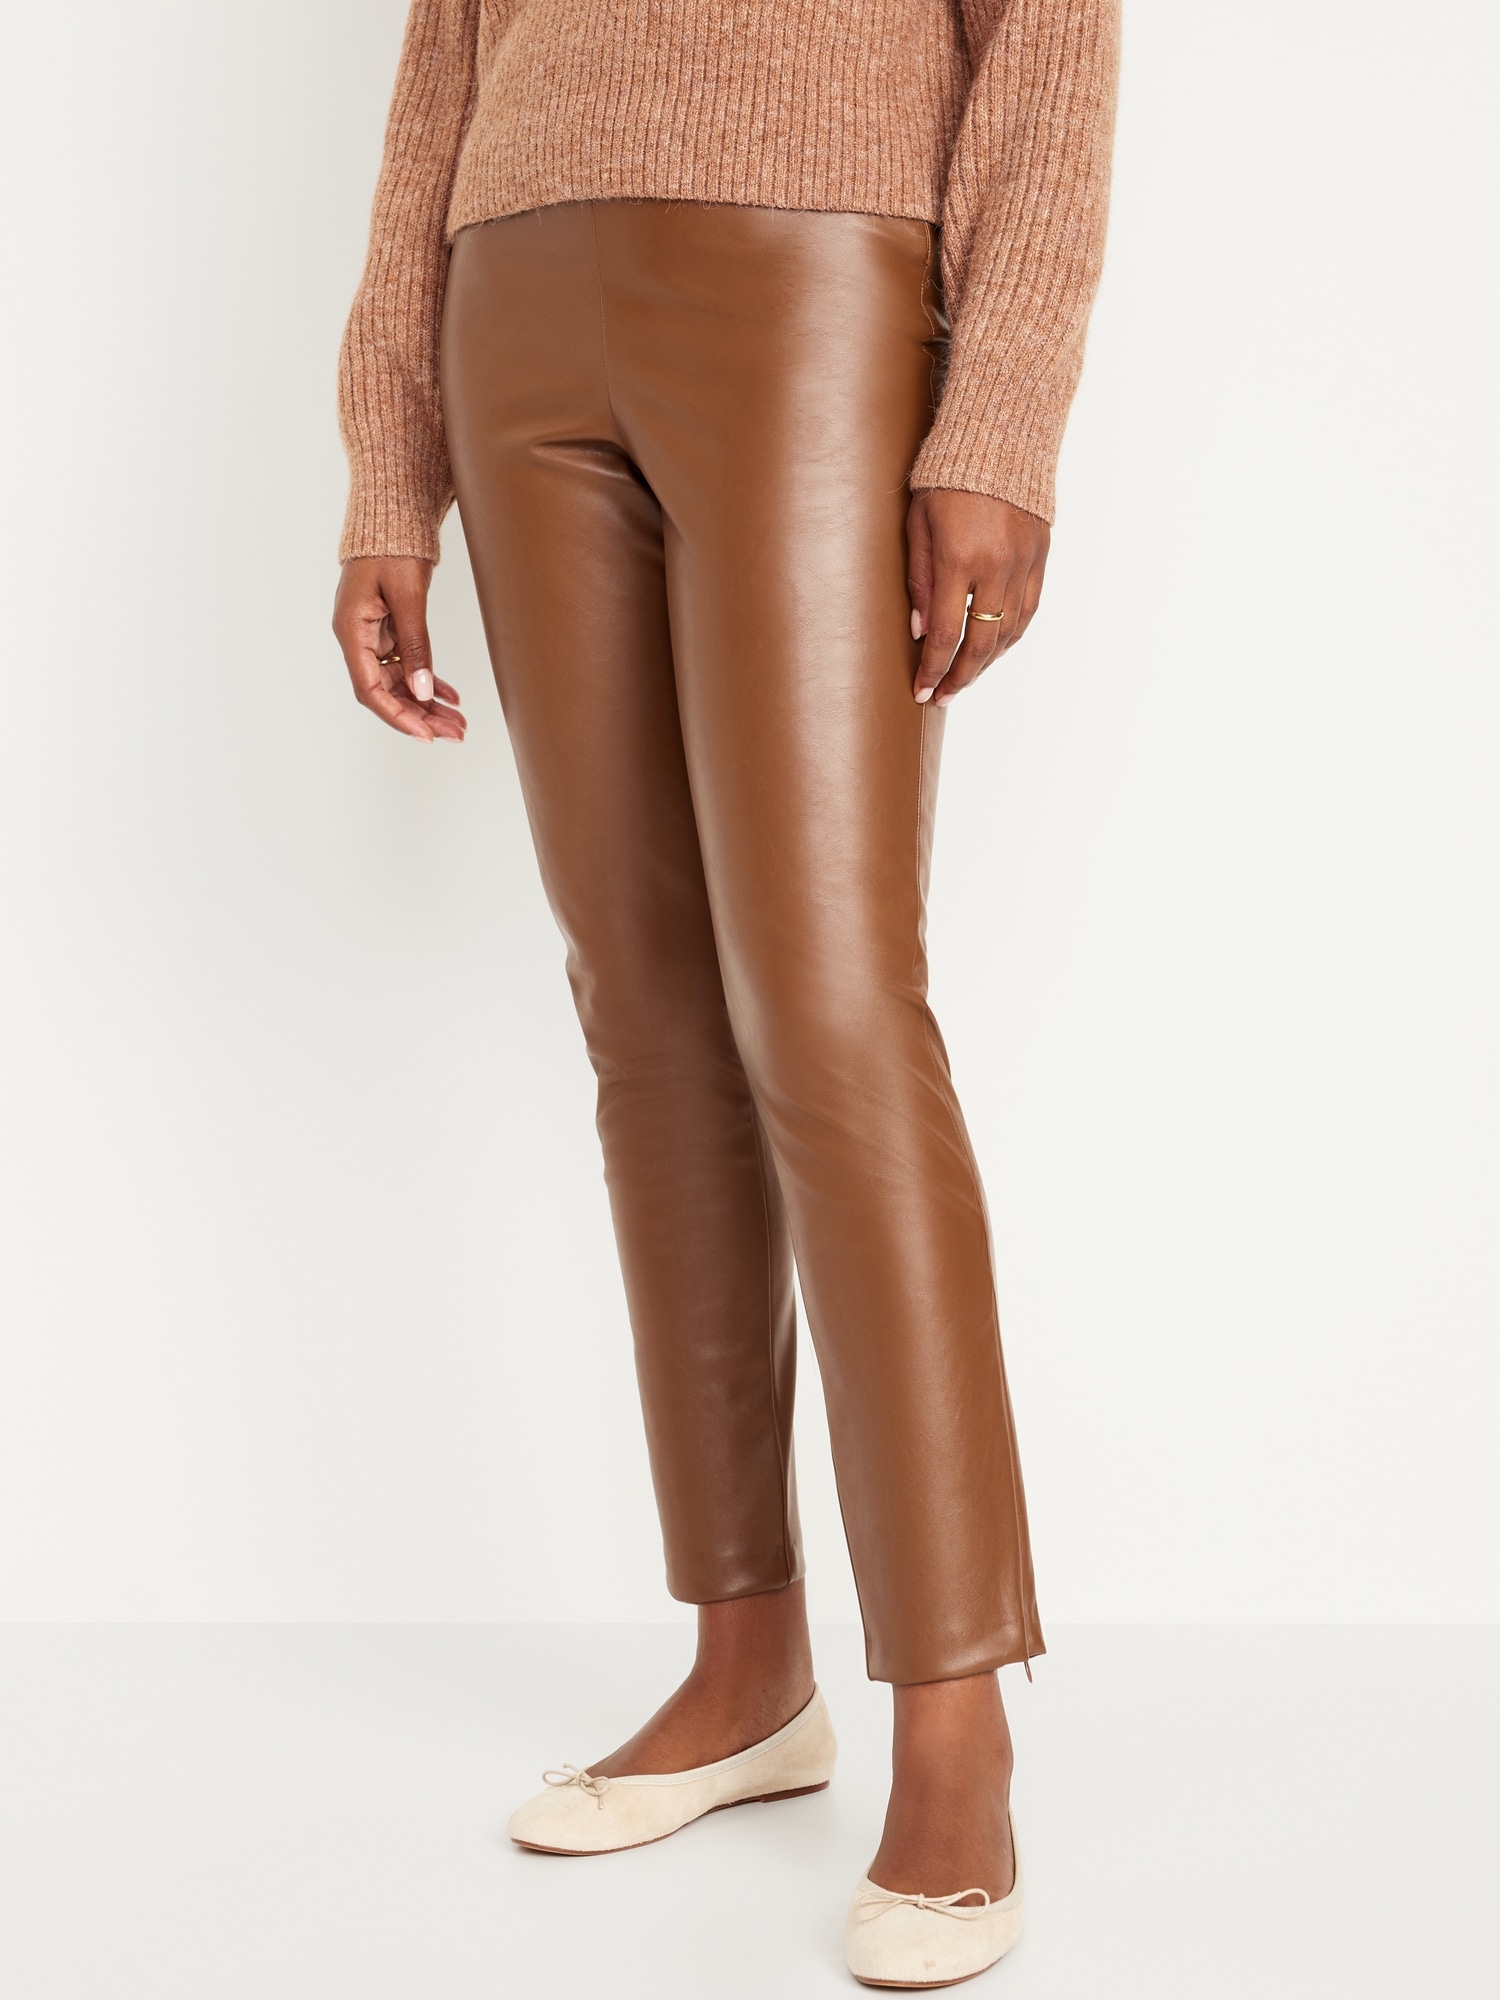 Faux Leather Petites Leggings for Women for sale